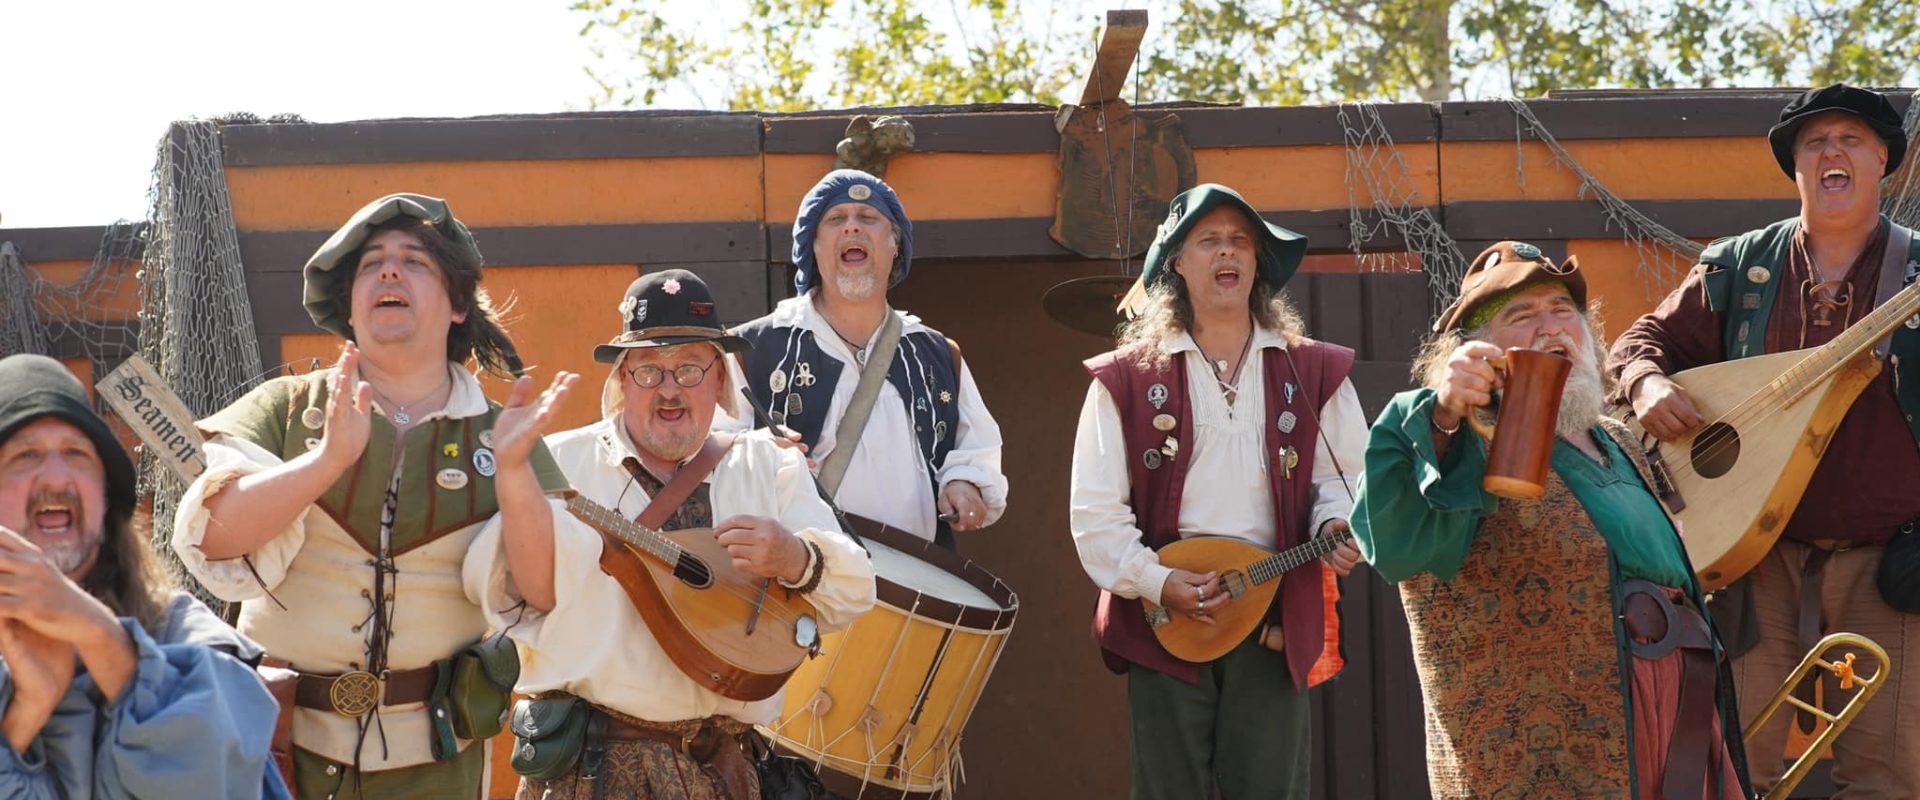 Join us at the Renaissance Pleasure Faire this Spring!